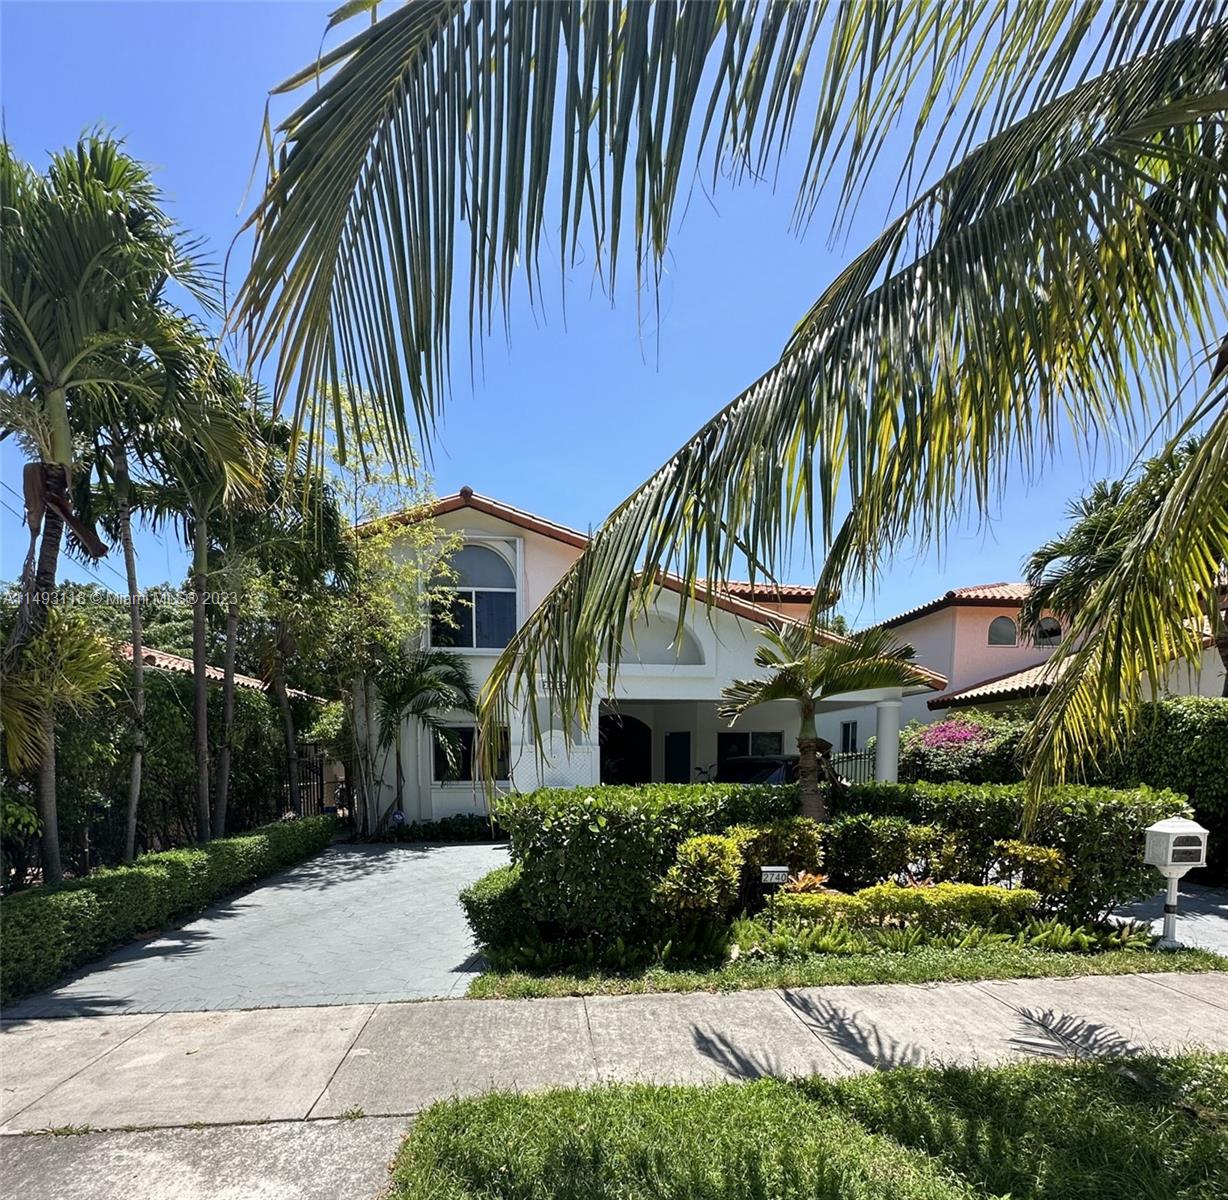 2740 SW 13th St, Miami, Florida 33145, 5 Bedrooms Bedrooms, ,4 BathroomsBathrooms,Residential,For Sale,2740 SW 13th St,A11493118